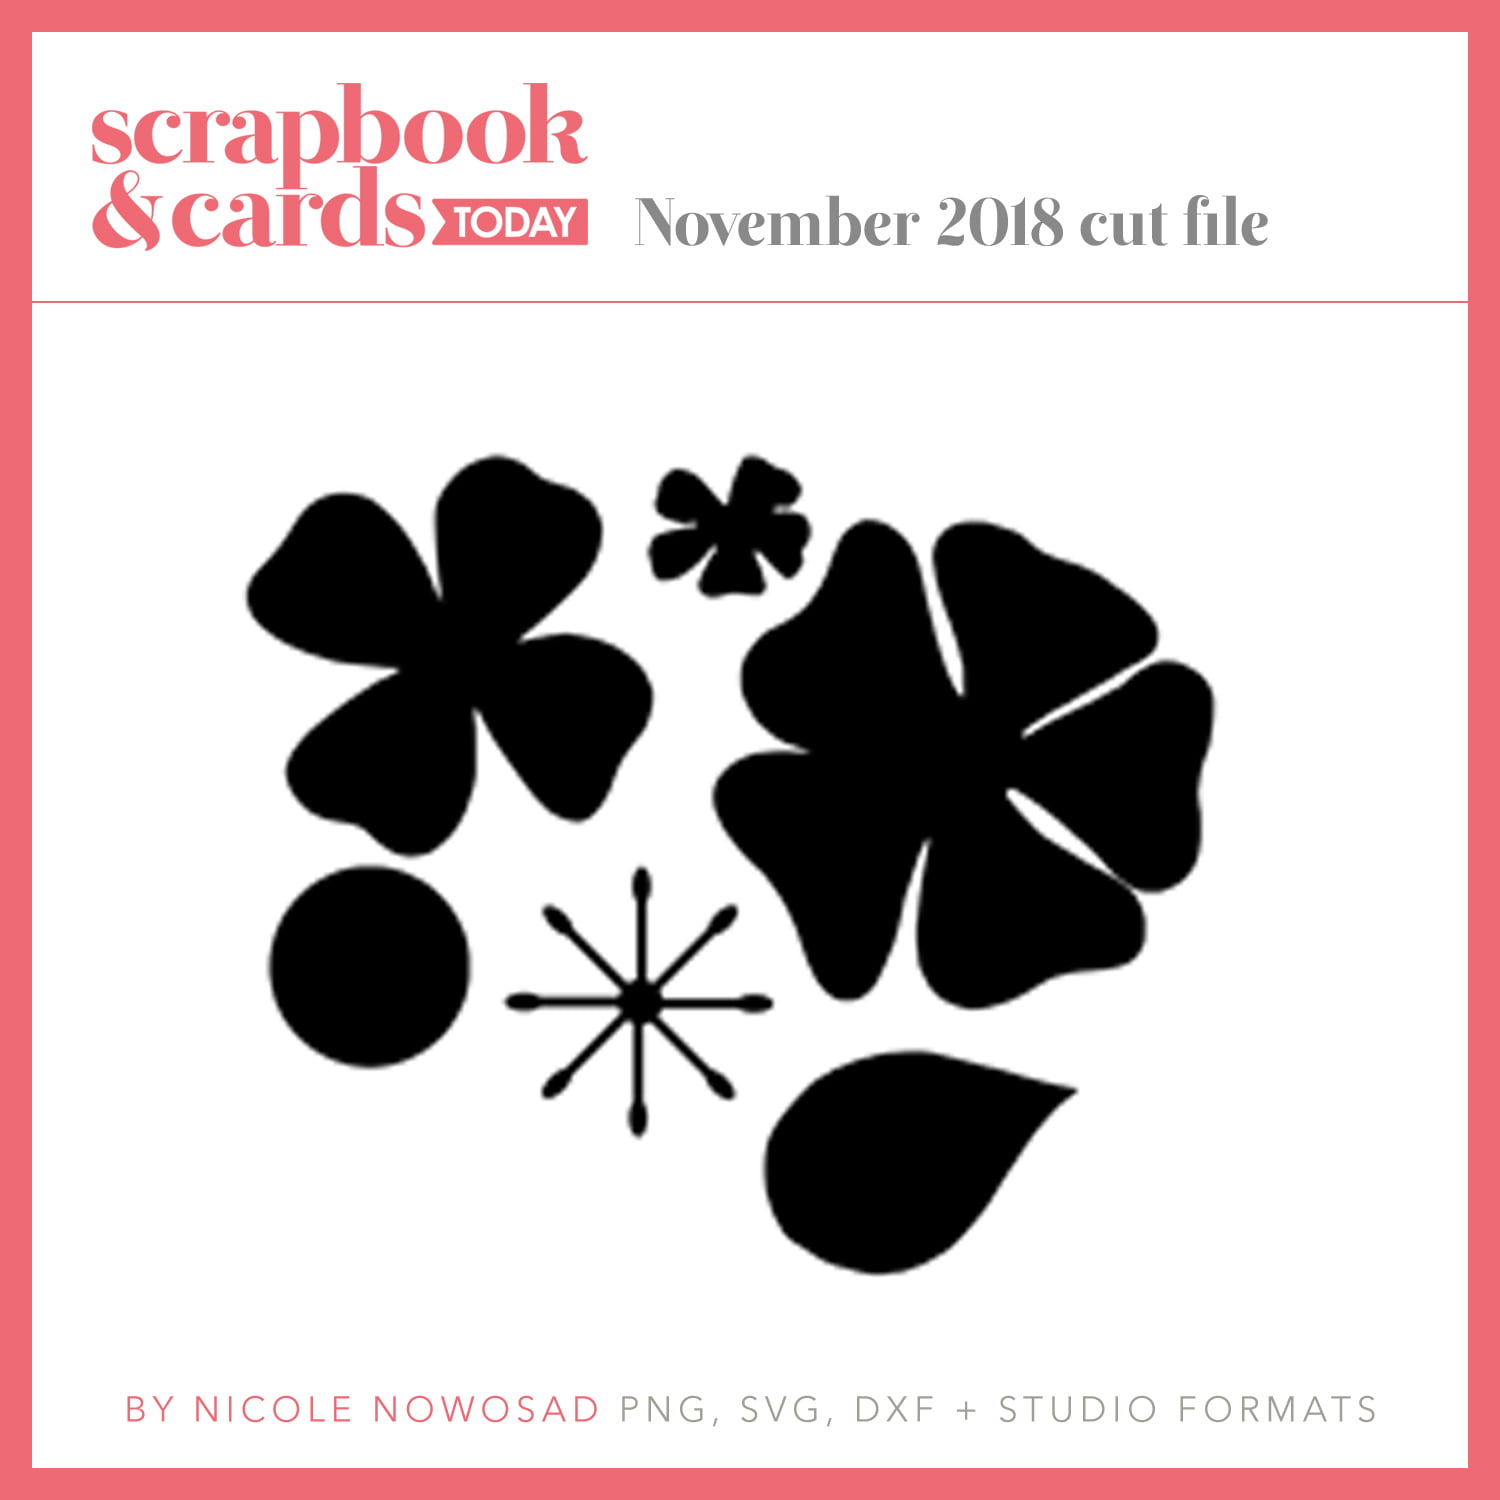 November 2018 free cut file for Scrapbook & Cards Today Magazine